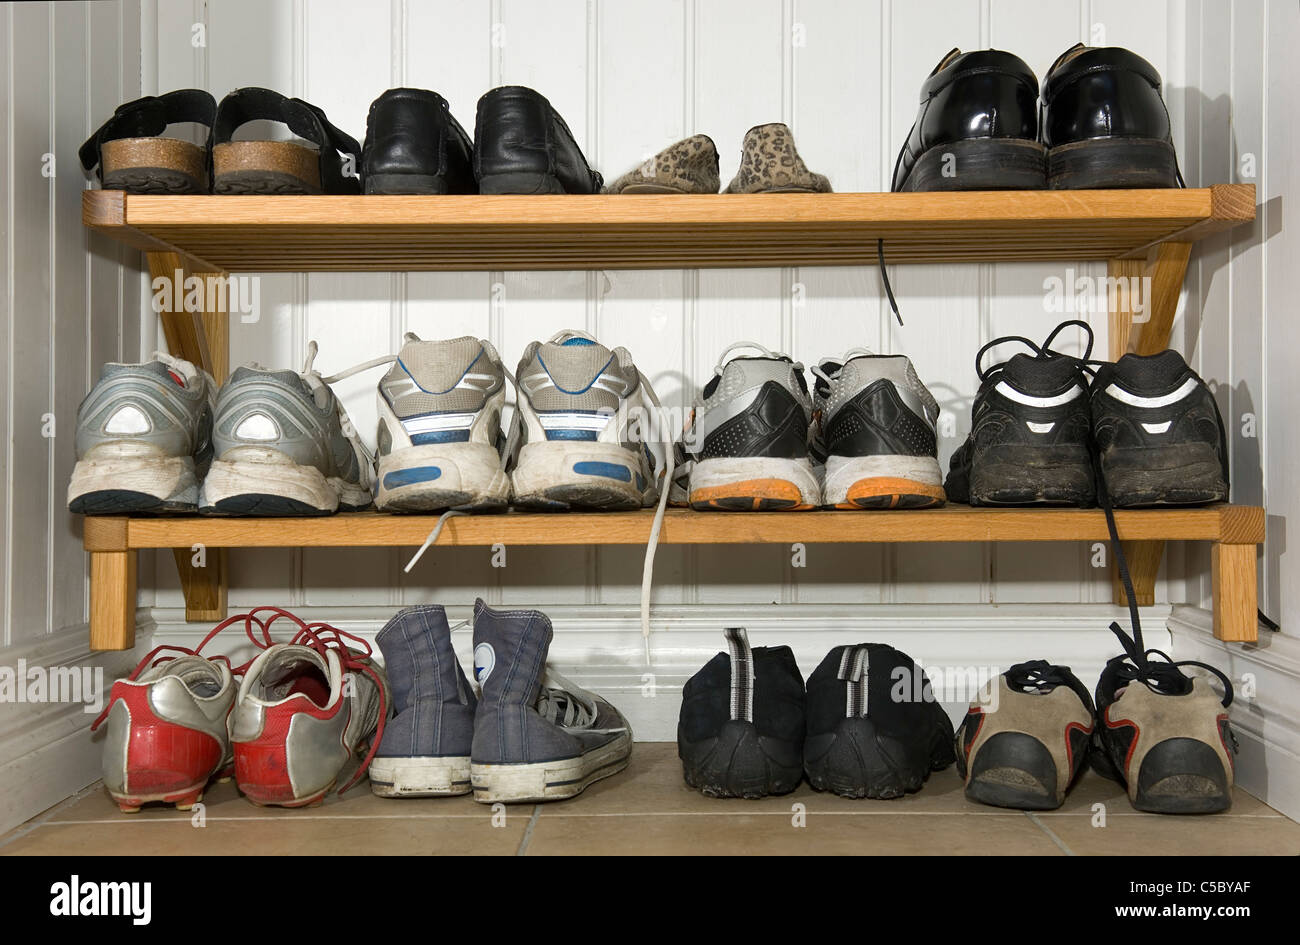 Shoes arranged in a line on the rack Stock Photo